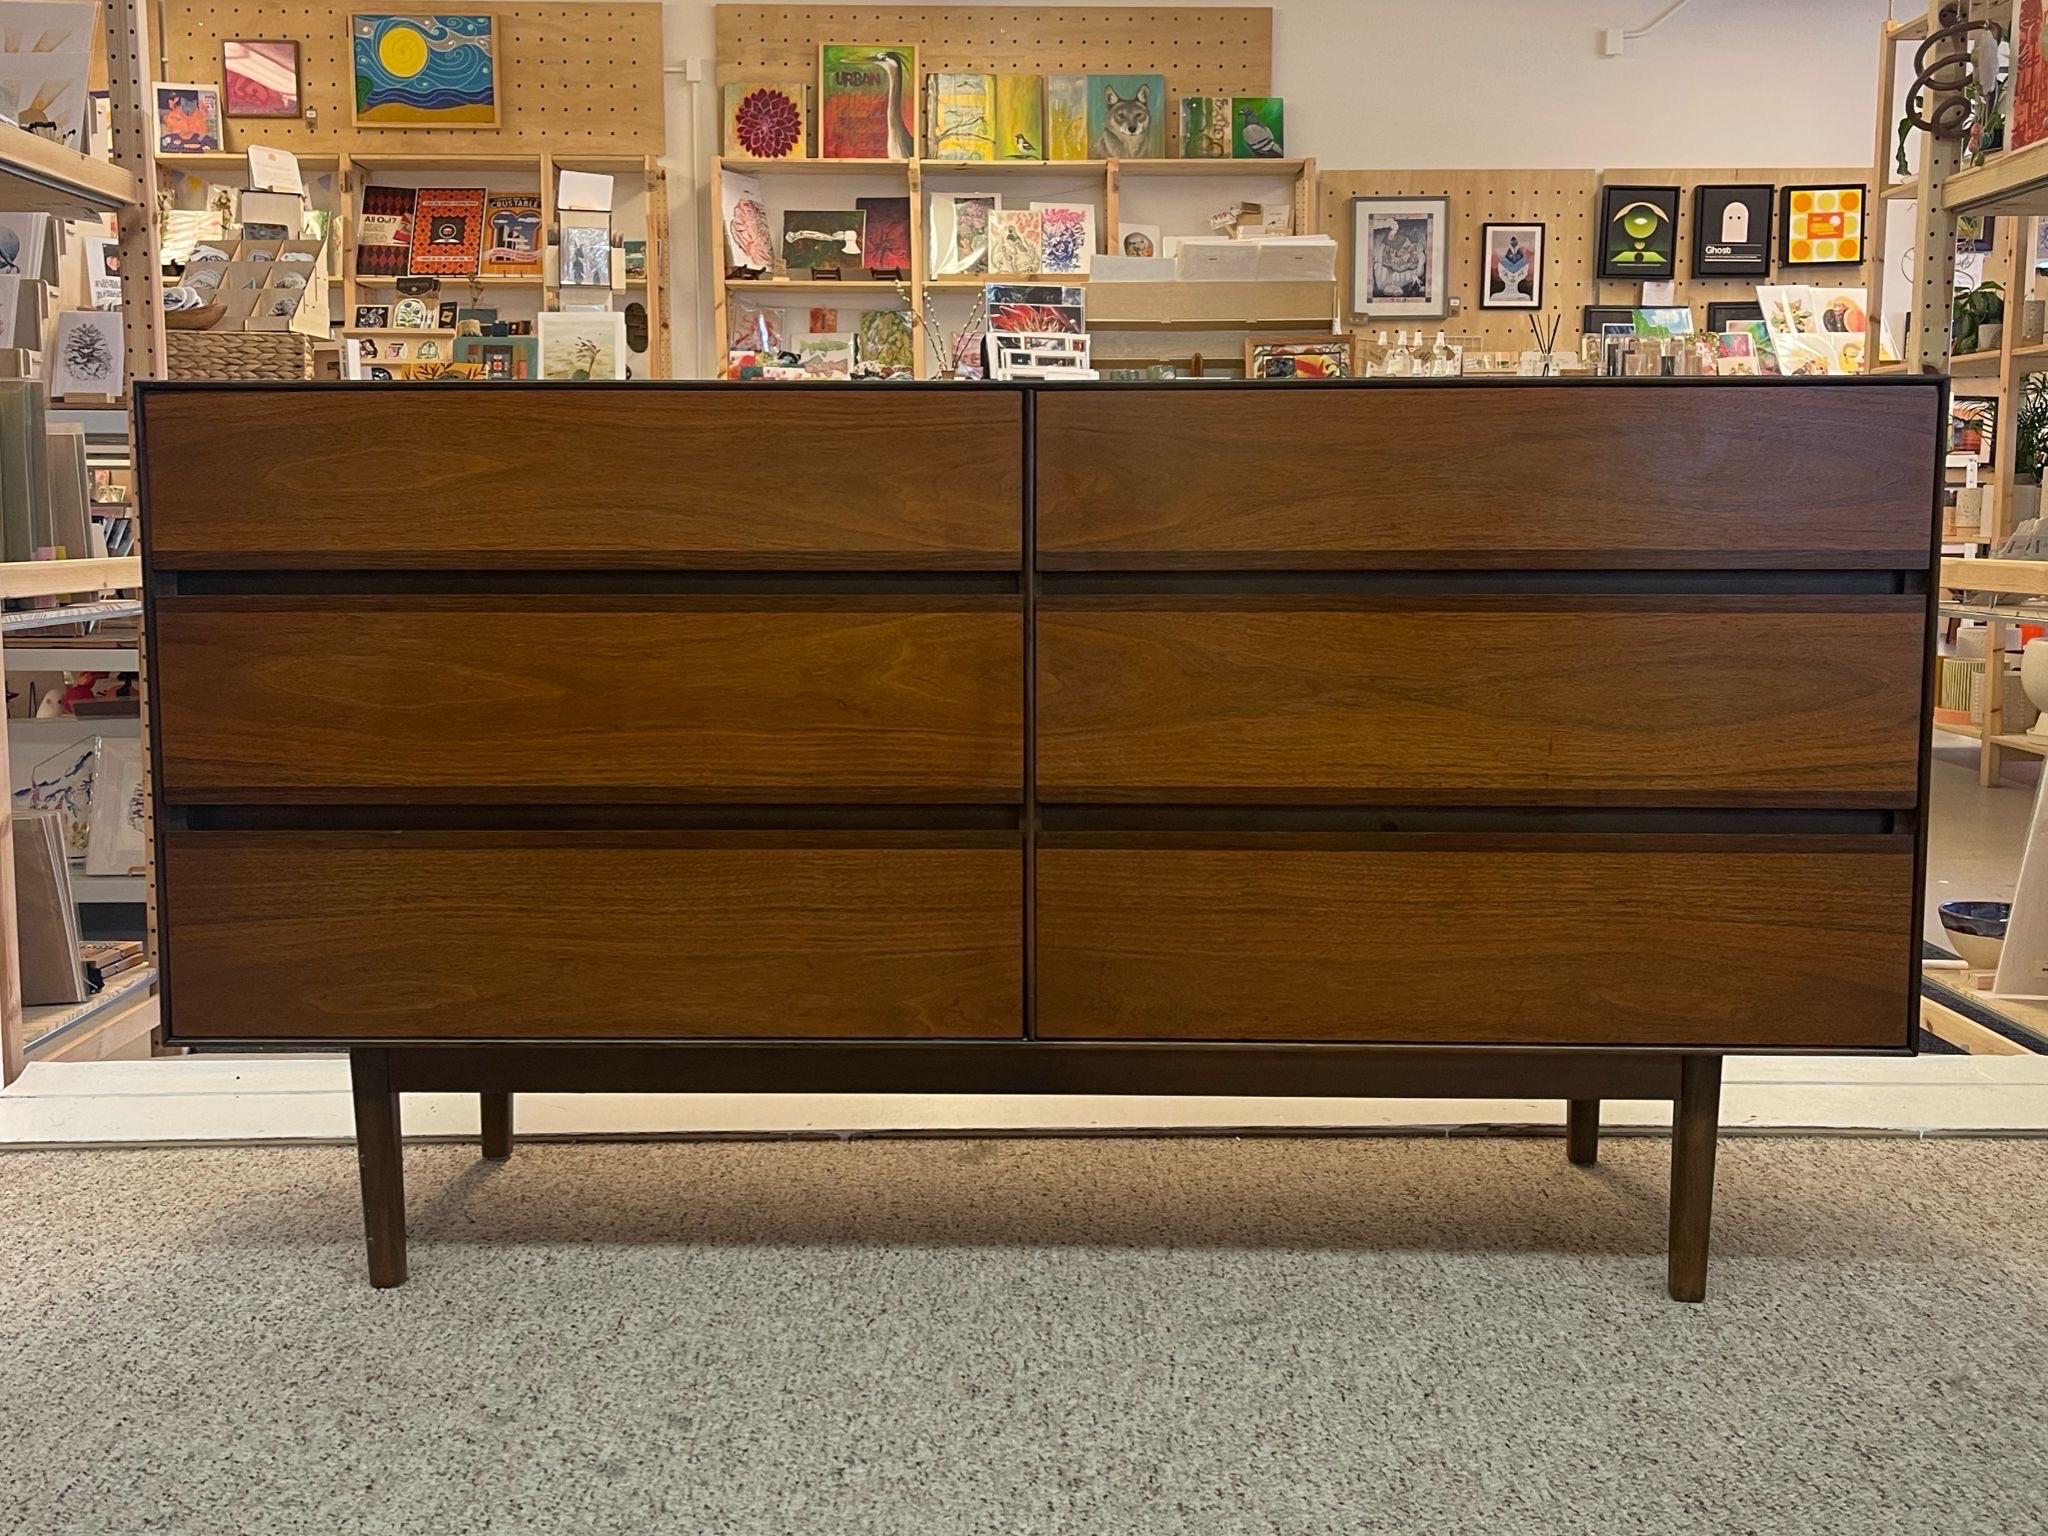 This dresser features 6 Dovetailed Drawers on tapered legs. Walnut toned wood. The Drawer are accented by bands of darker wood grain. Circa 1960s/1970s. Vintage Condition Consistent with Age as Pictured:

Dimensions. 56 W ; 18 D ; 30 H